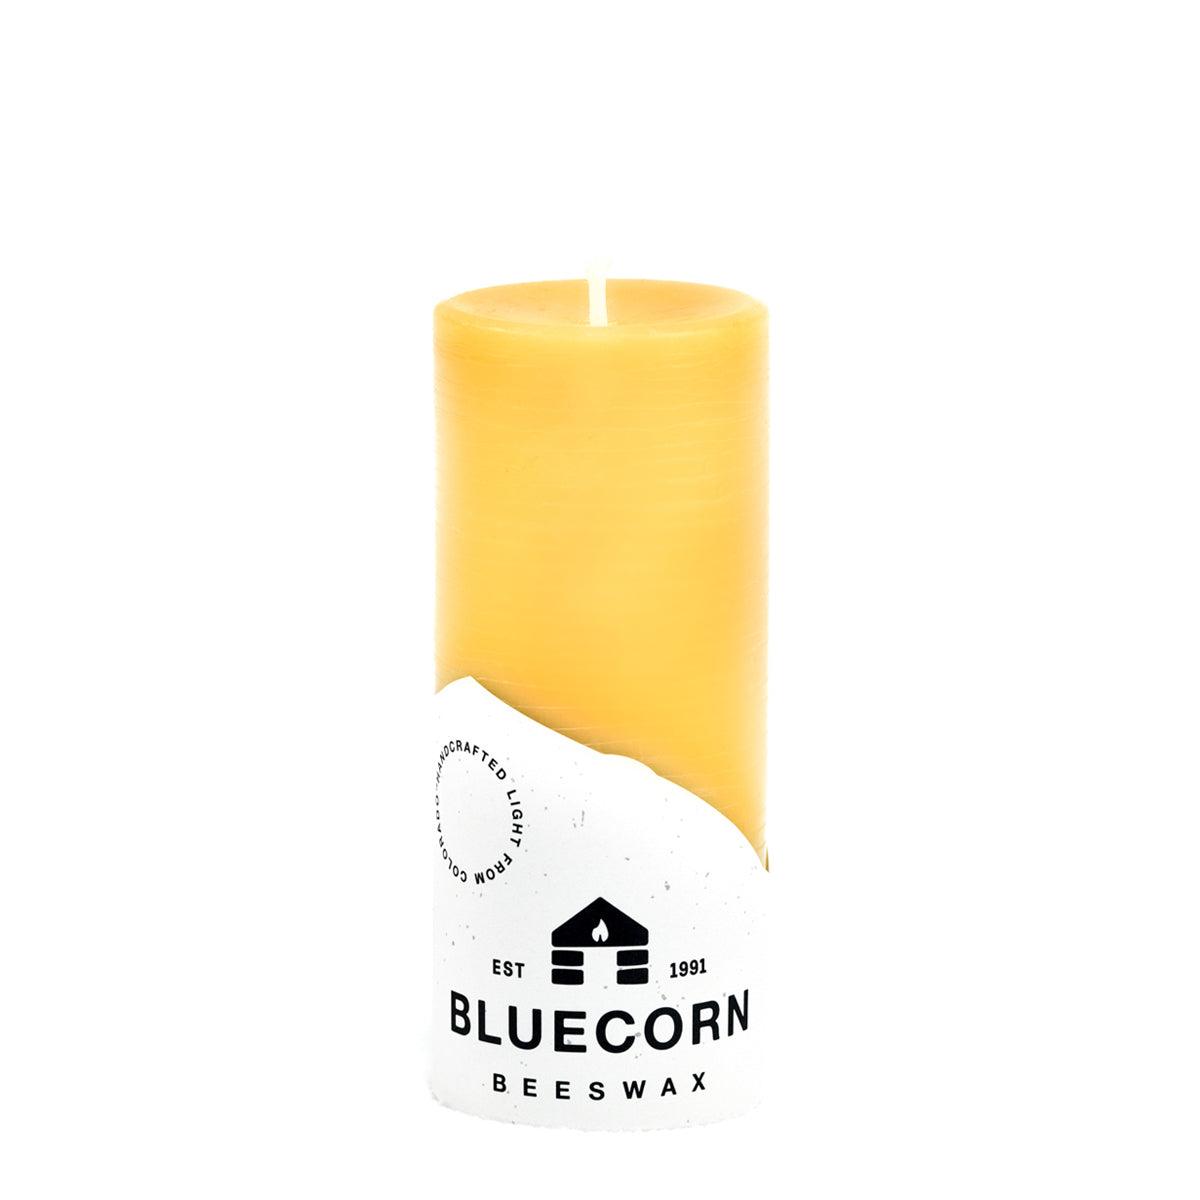 Bluecorn Beeswax 100% Pure Beeswax 2" x 4.5" Raw Pillar Candle. Burn Time: 36 hours. Made with 100% Pure Beeswax, is golden in color, with a light honey scent. Made with 100% pure cotton wick, no lead and paraffin free. Clean burning and non-toxic. Features Bluecorn Beeswax label printed on 100% recycled paper.